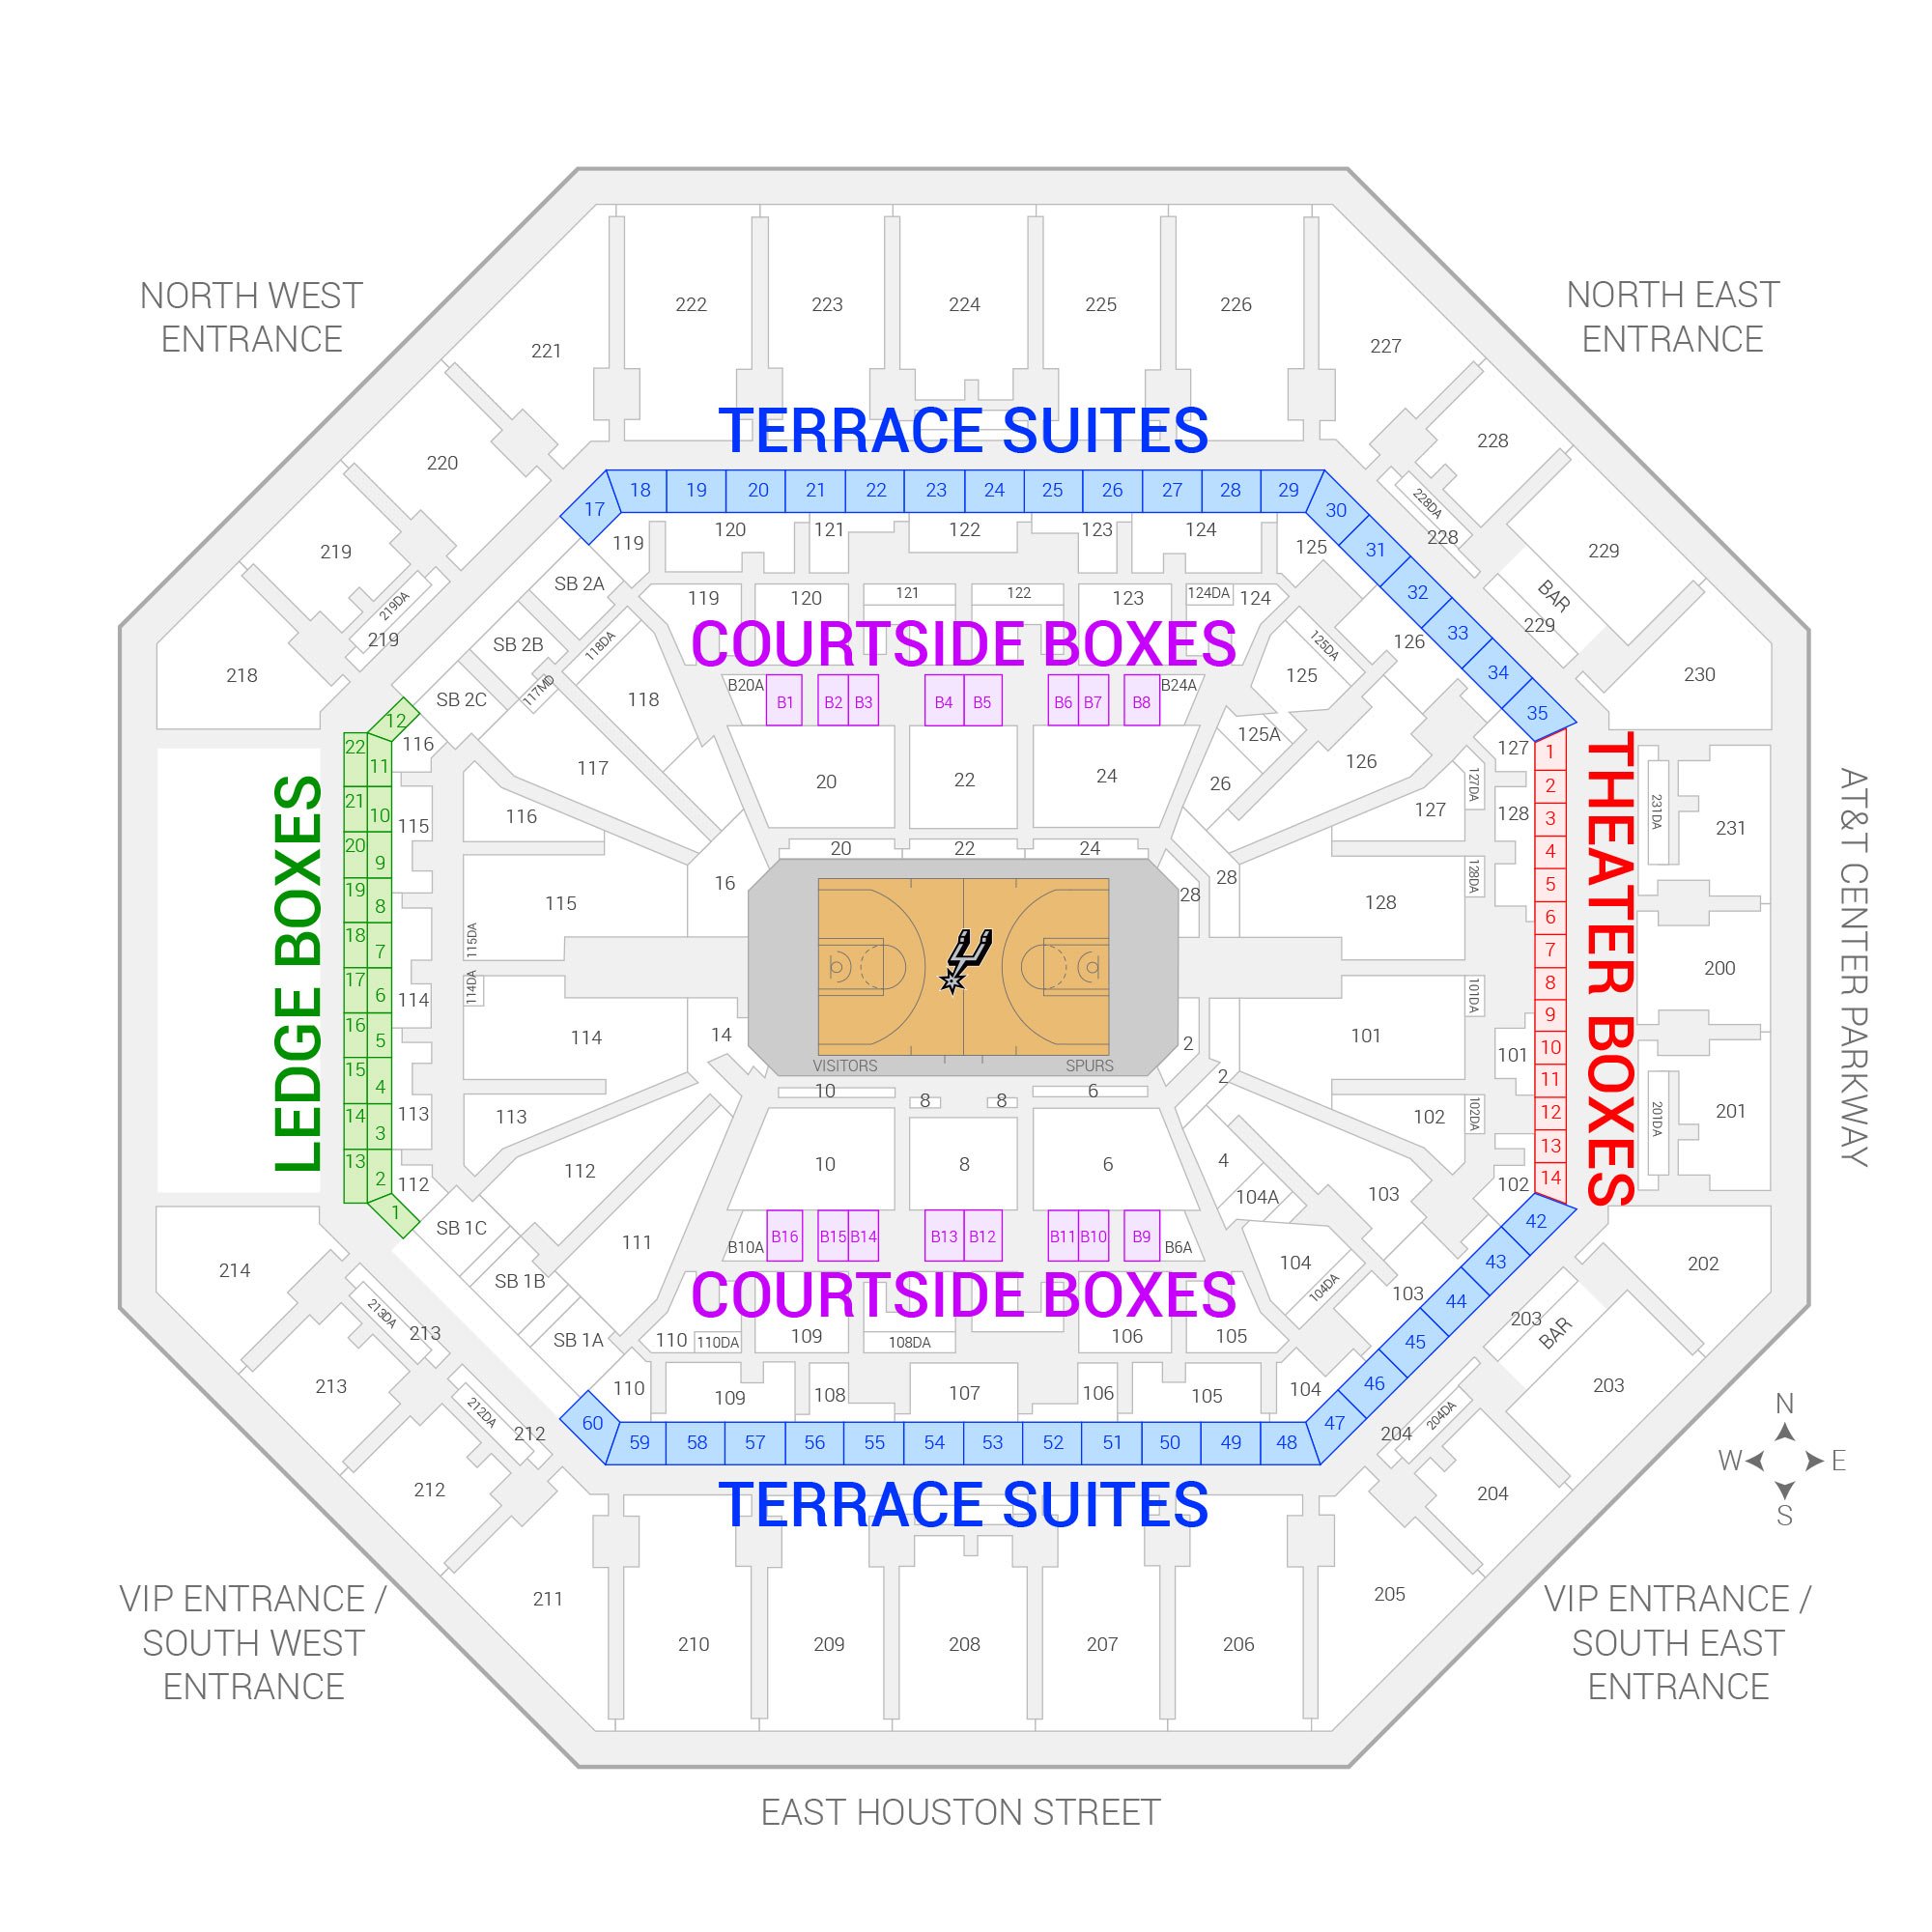 AT&T Center / San Antonio Spurs Suite Map and Seating Chart